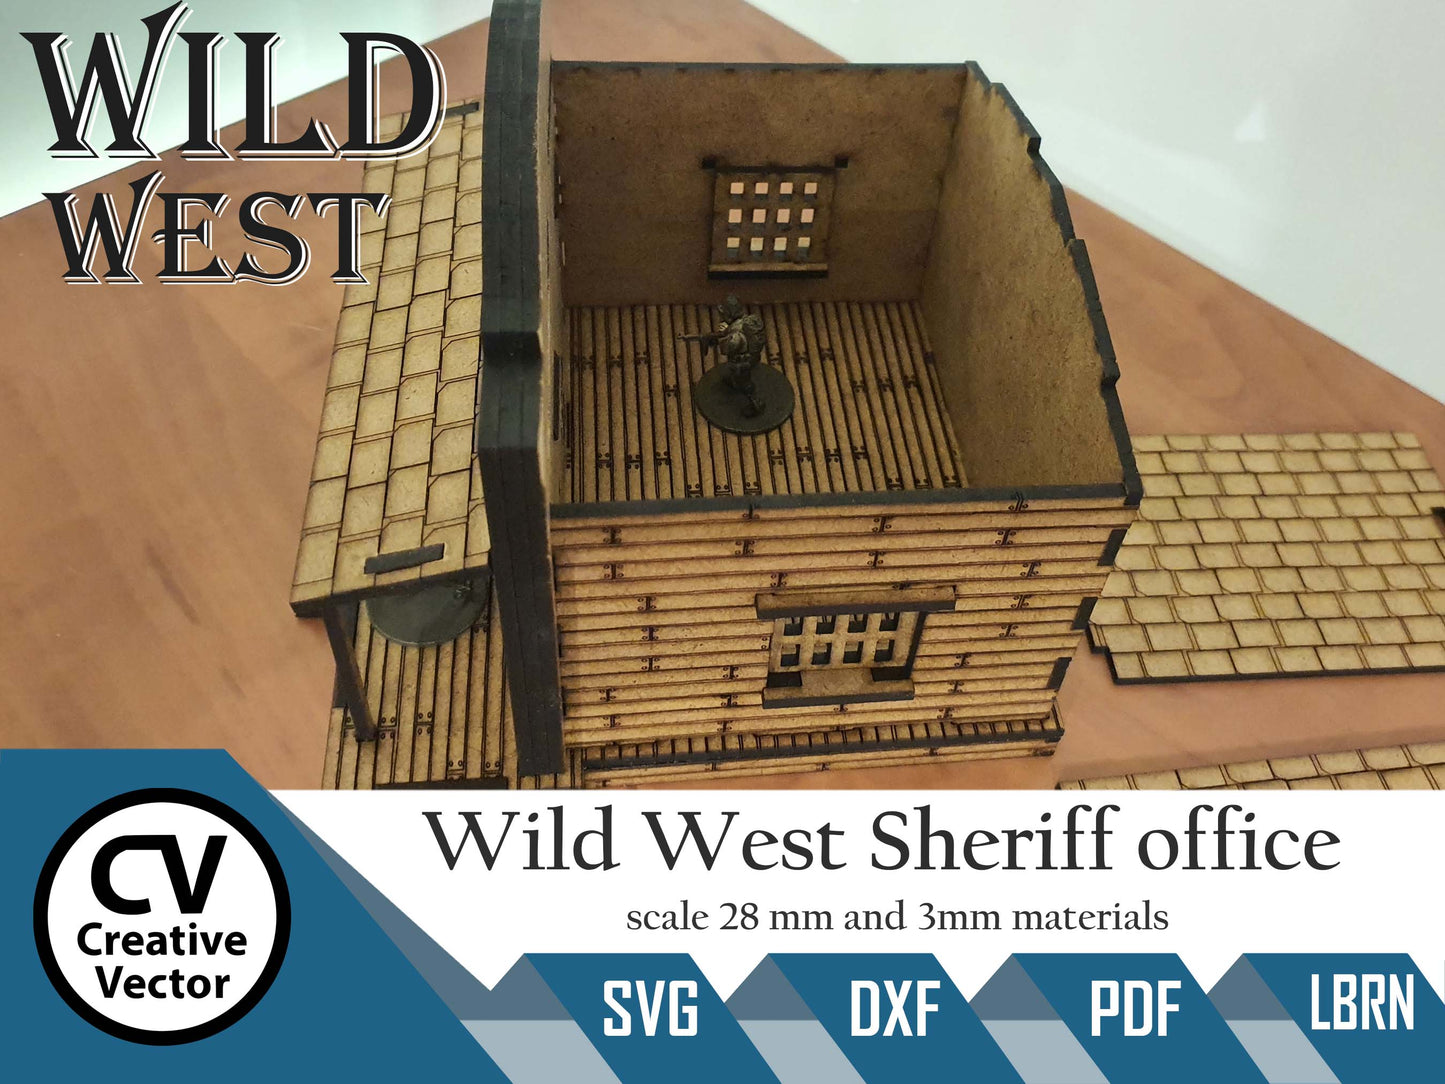 Wild West Sheriff office in scale 28mm for Wargamers